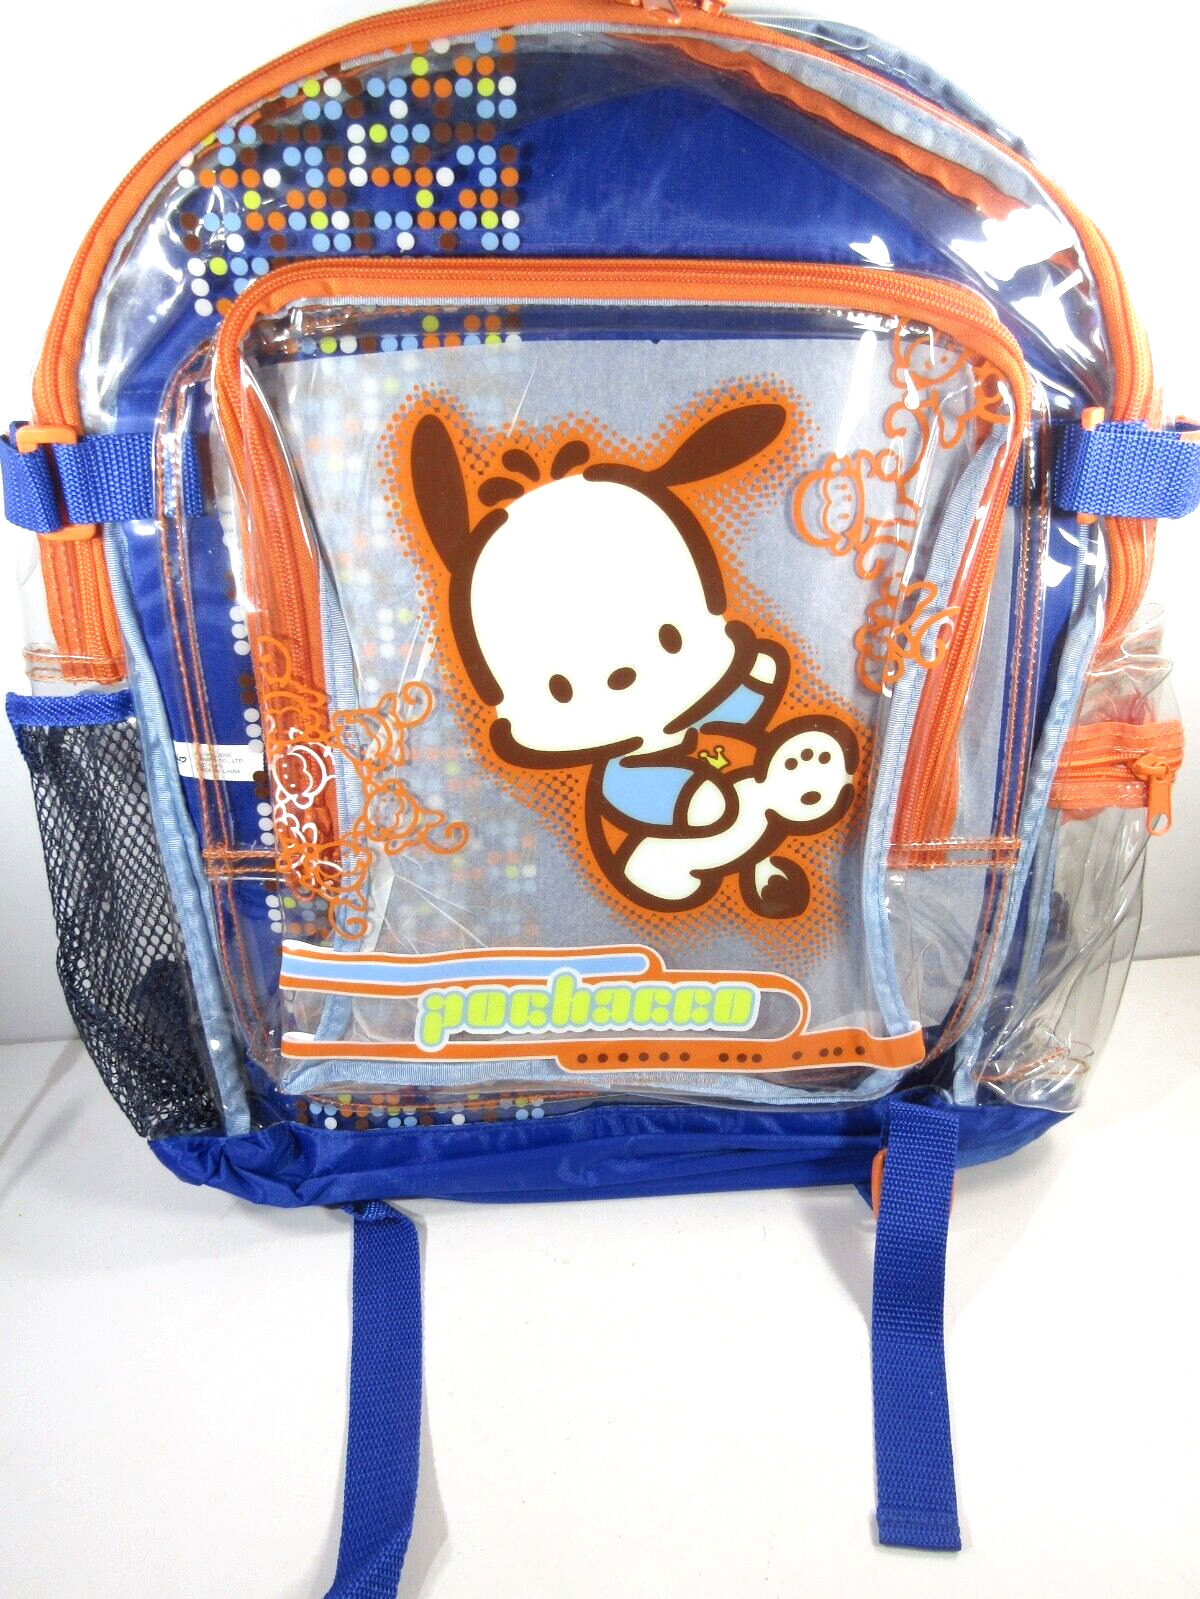 Sanrio Pochacco Backpack Vintage 2000 Brand New with Tag